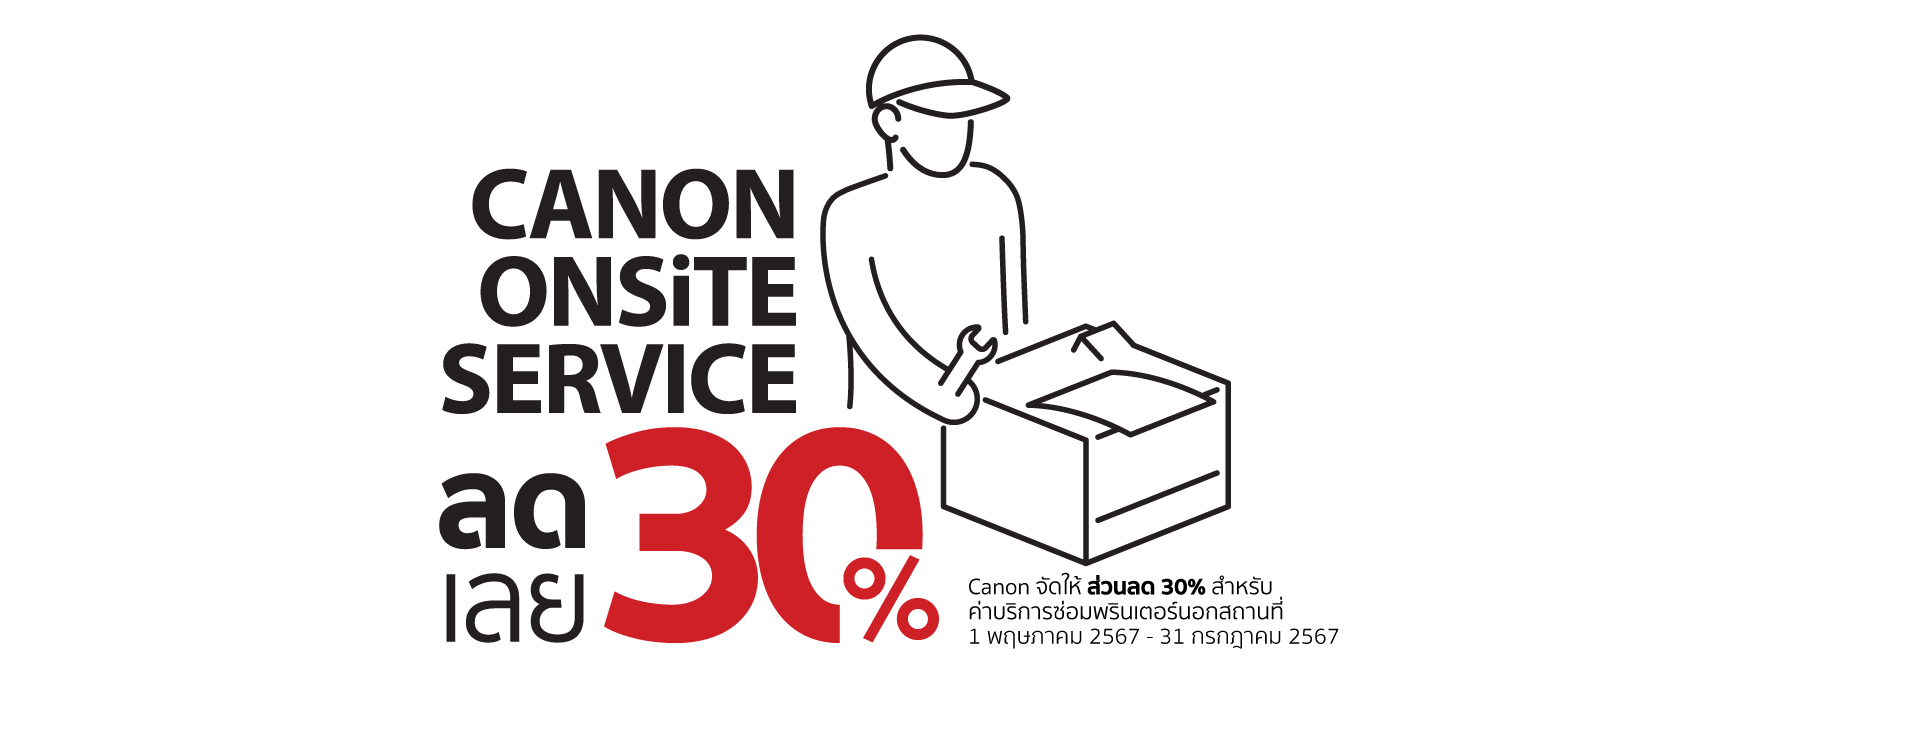 Canon-onsite-service-discount-30-percent-TH.jpg